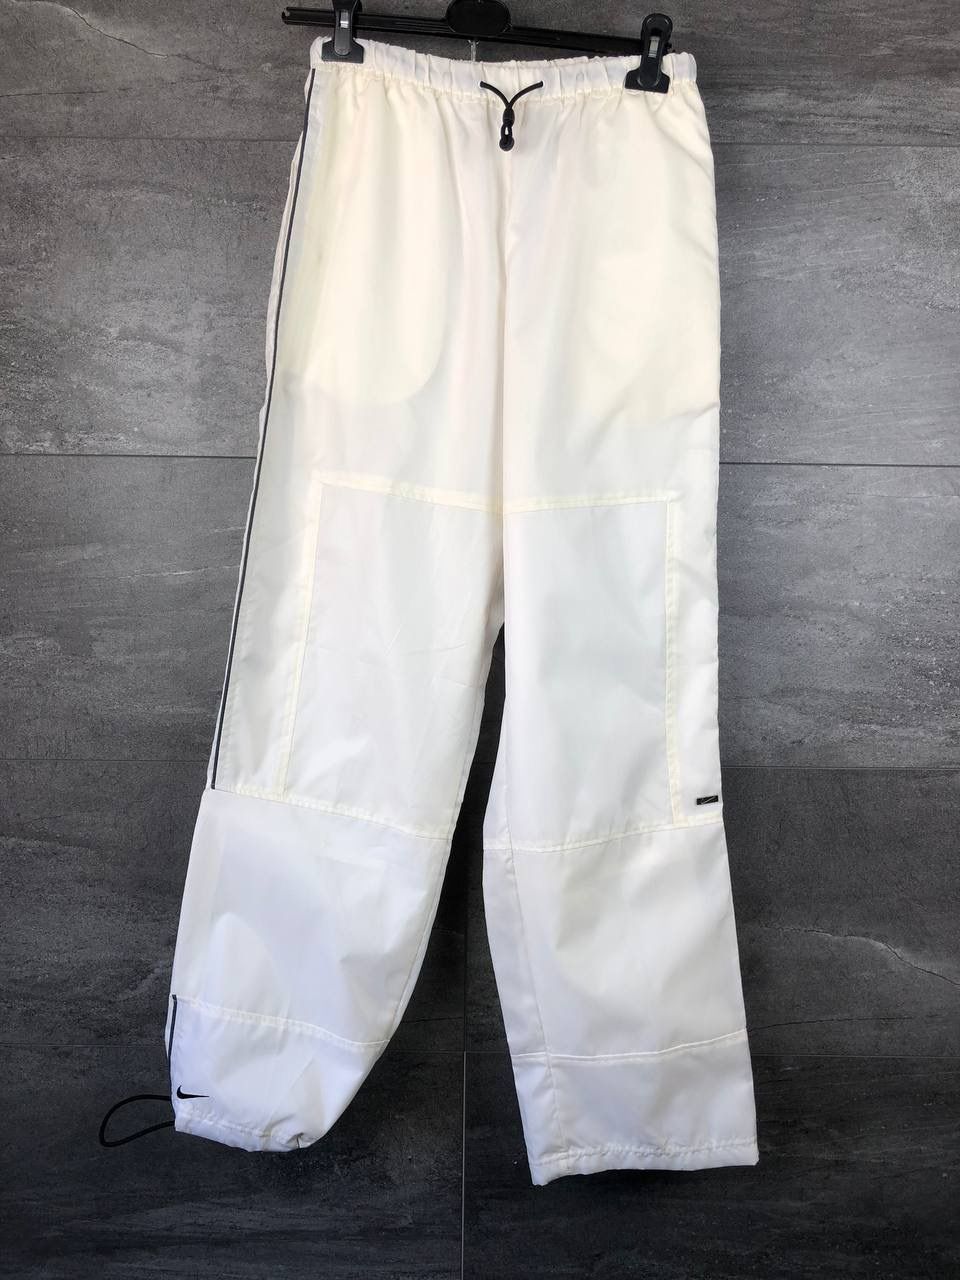 Pre-owned Nike X Vintage Nike Track Pants Baggy Gorpcore Drill Joggers Vintage In White